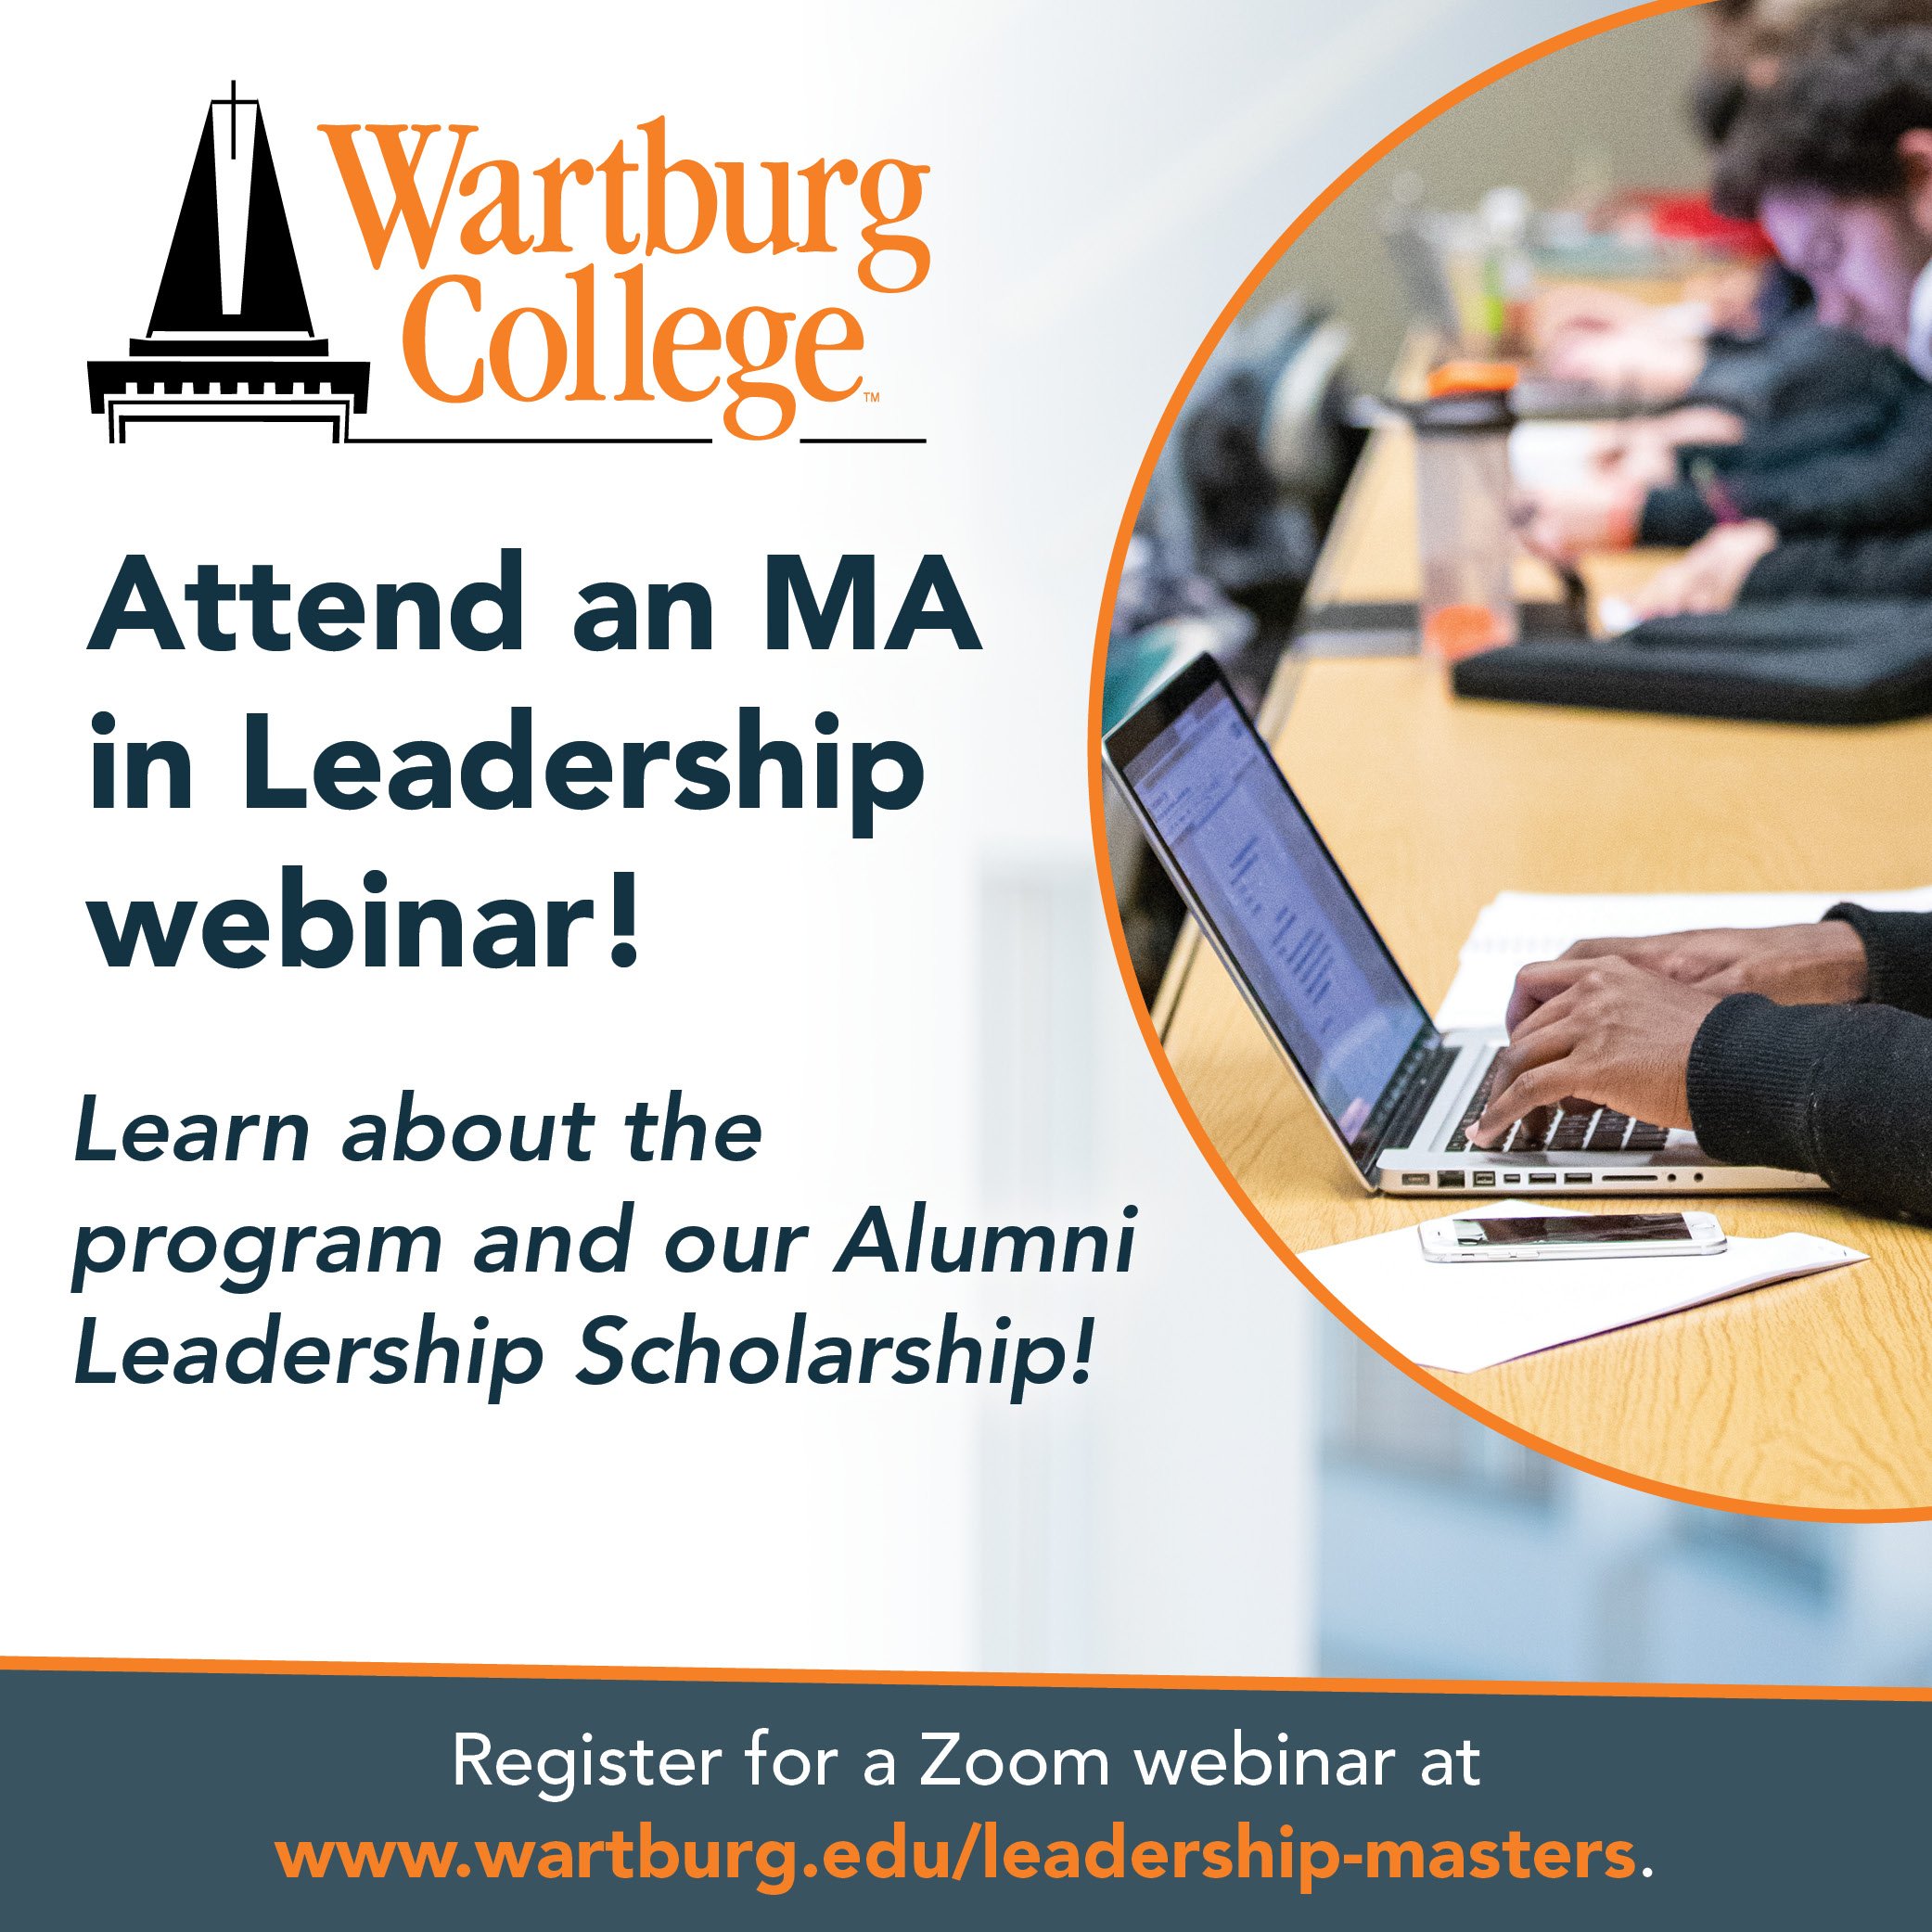 Wartburg College: Attend an M.A. in Leadership webinar! Learn about the program and our Alumni Leadership Scholarship.